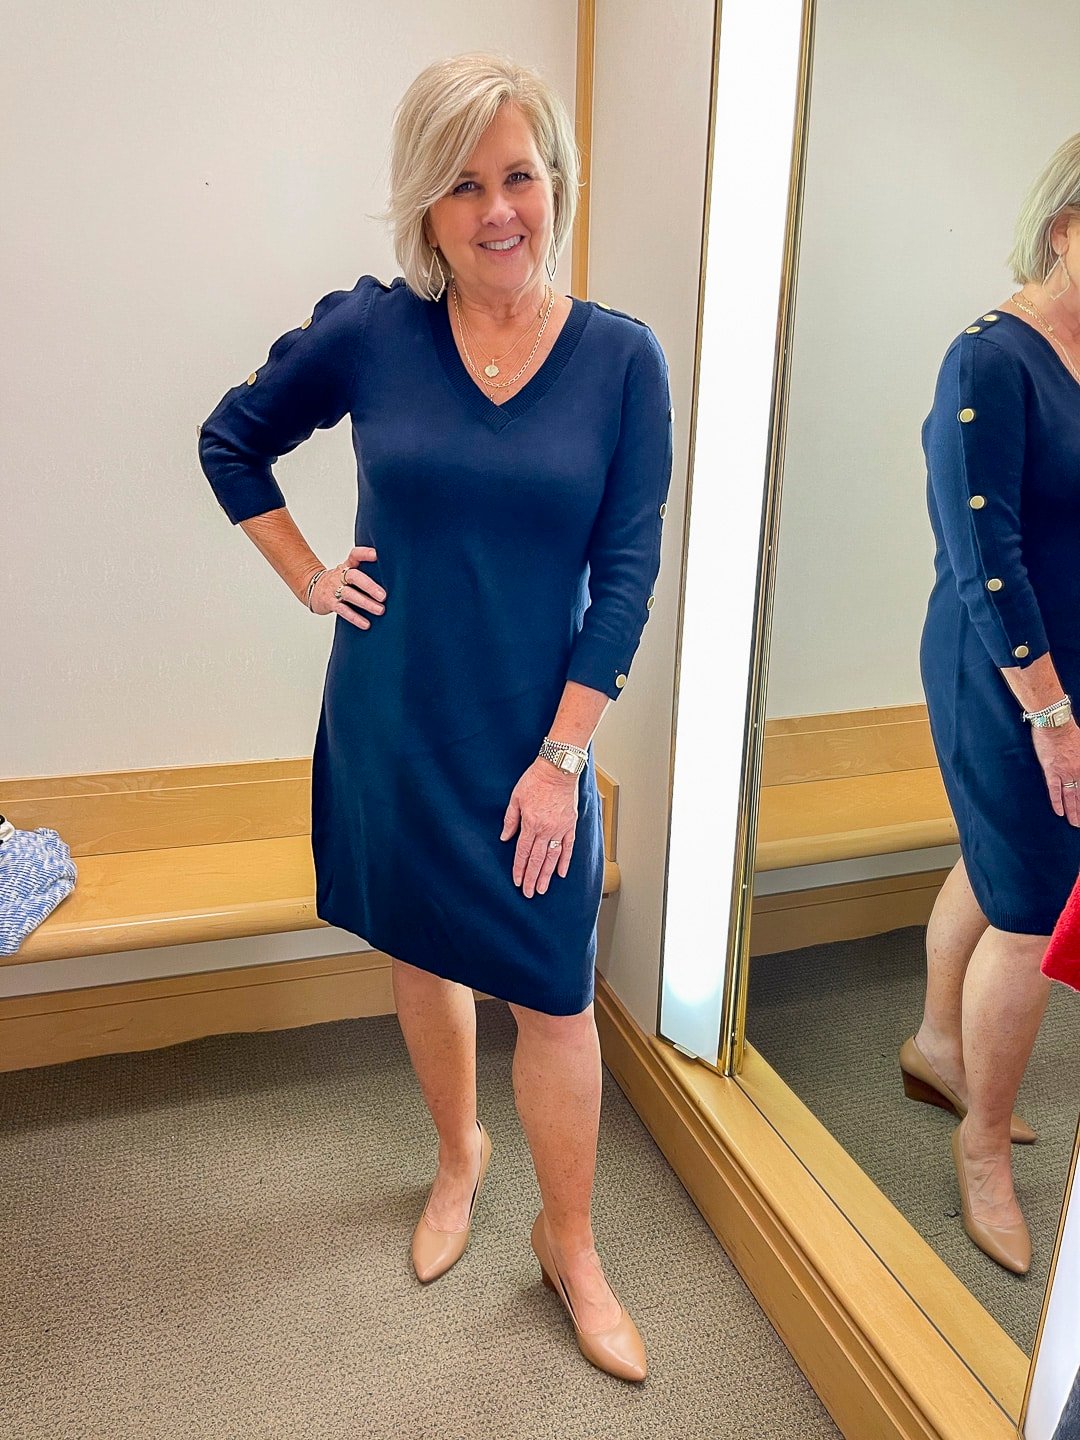 Over 40 Fashion Blogger, Tania Stephens is doing a Try-On Haul for Talbot's Fall Collection August 2022 12